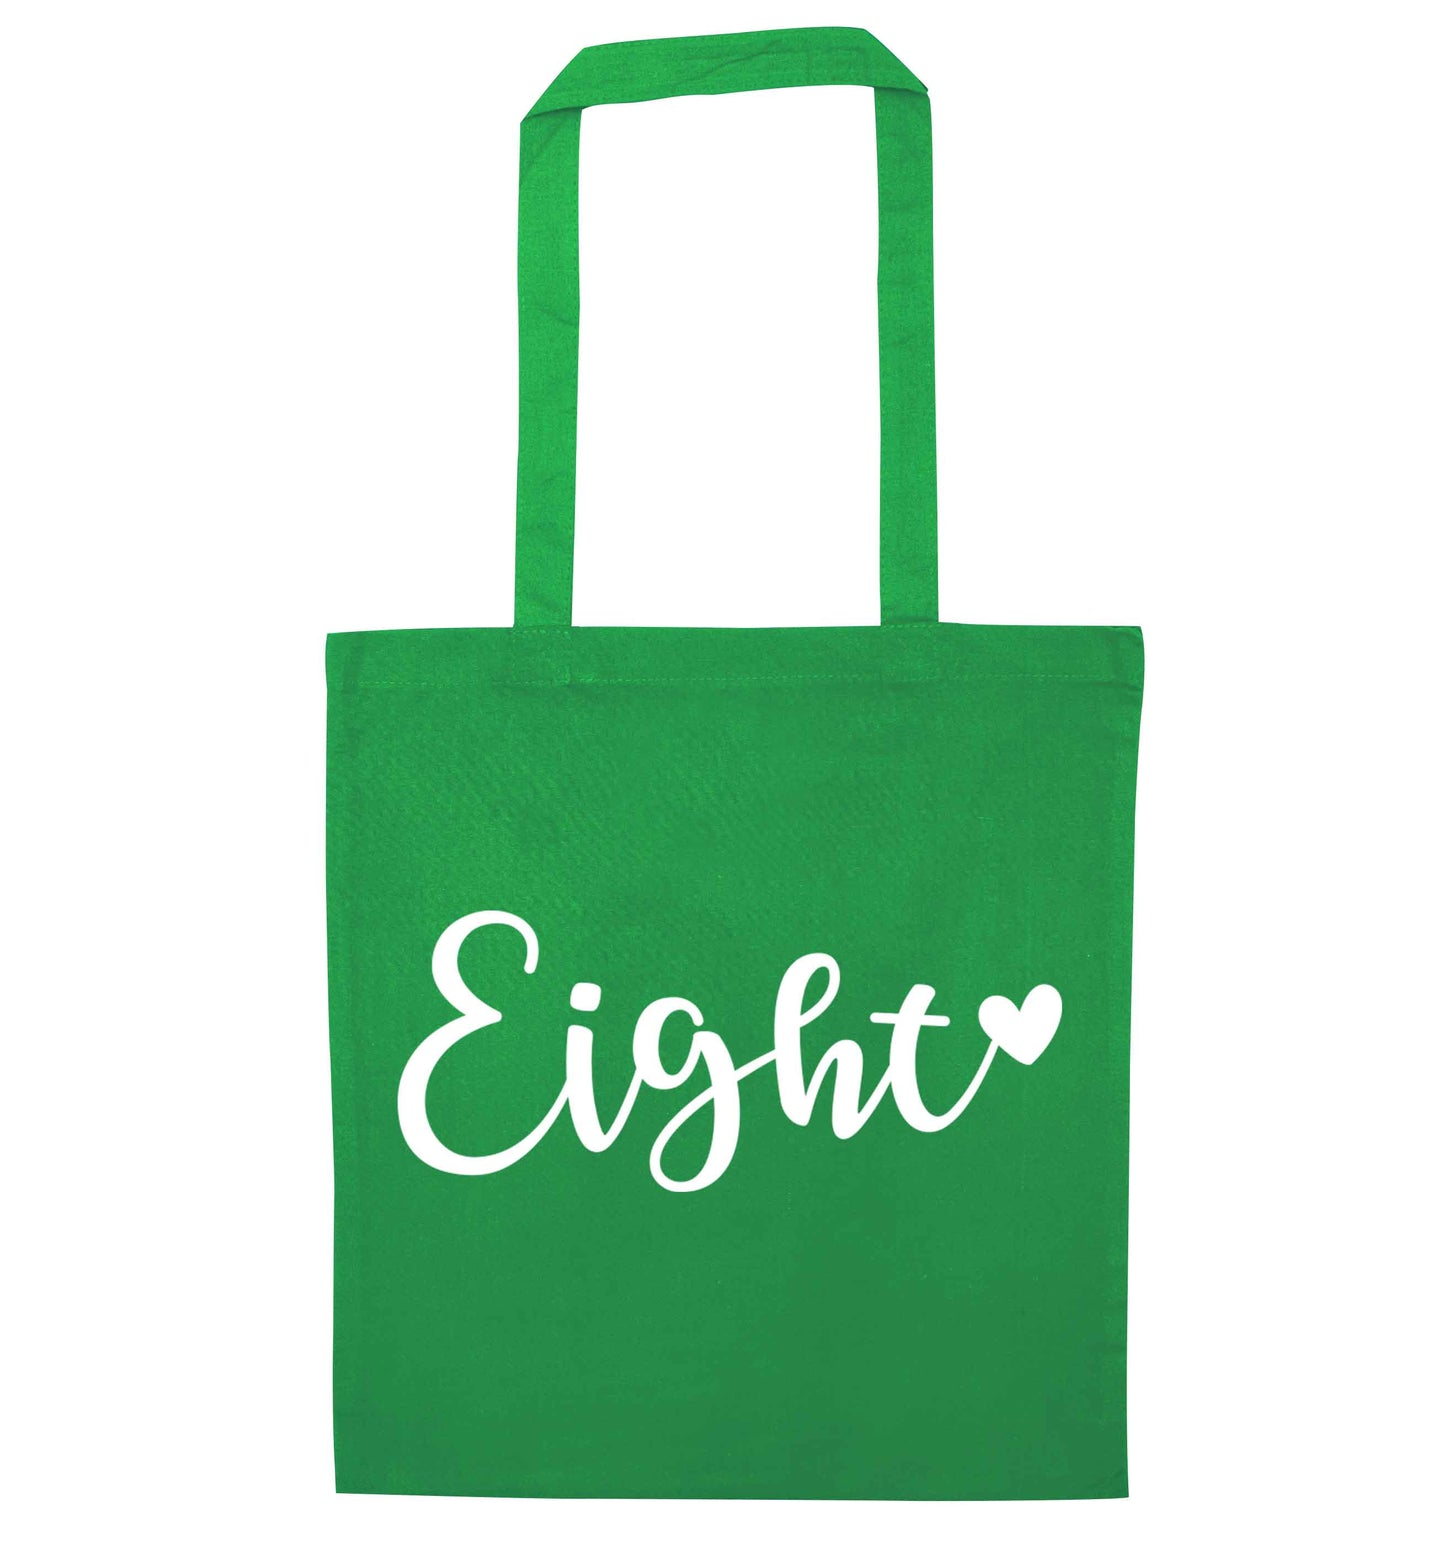 Eight and heart green tote bag